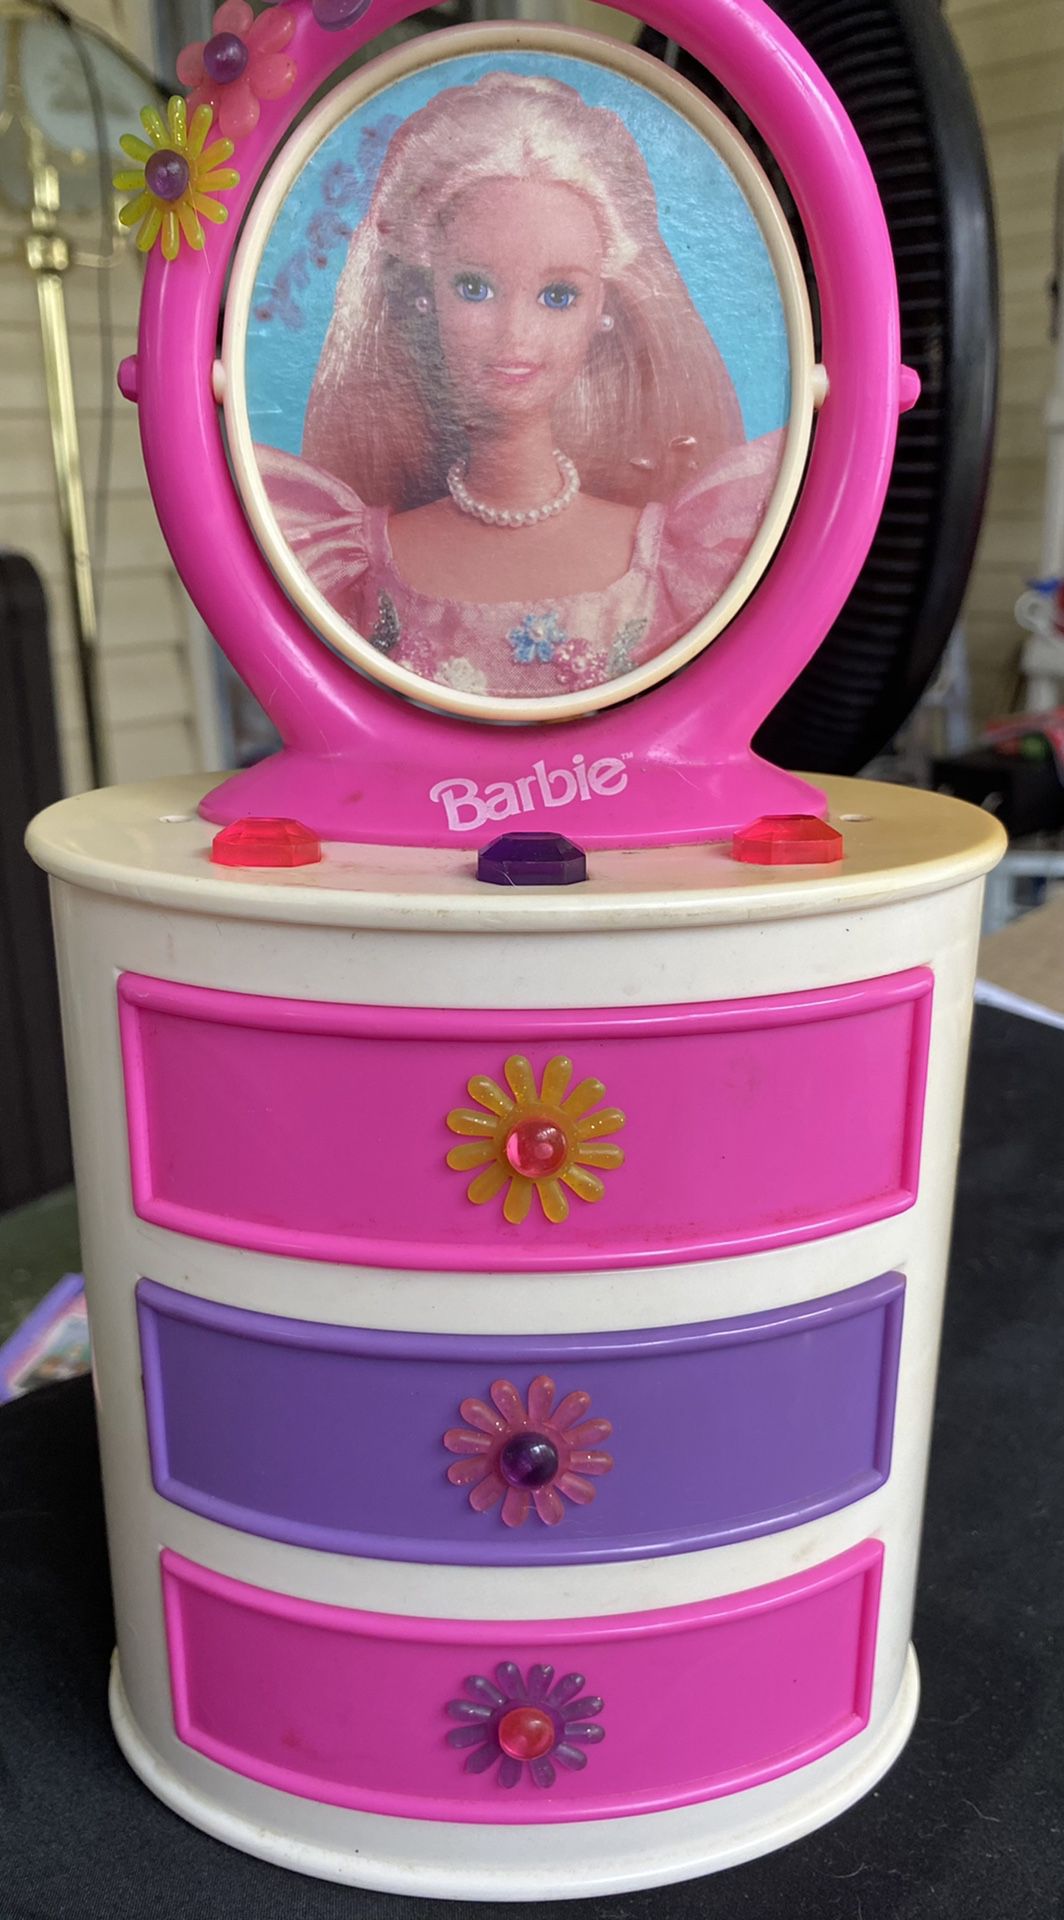 Vintage 1997 3 drawer Barbie jewelry box. This is so incredibly cute!! Shows signs of wear from use but buttons and drawers work good. Includes vinta